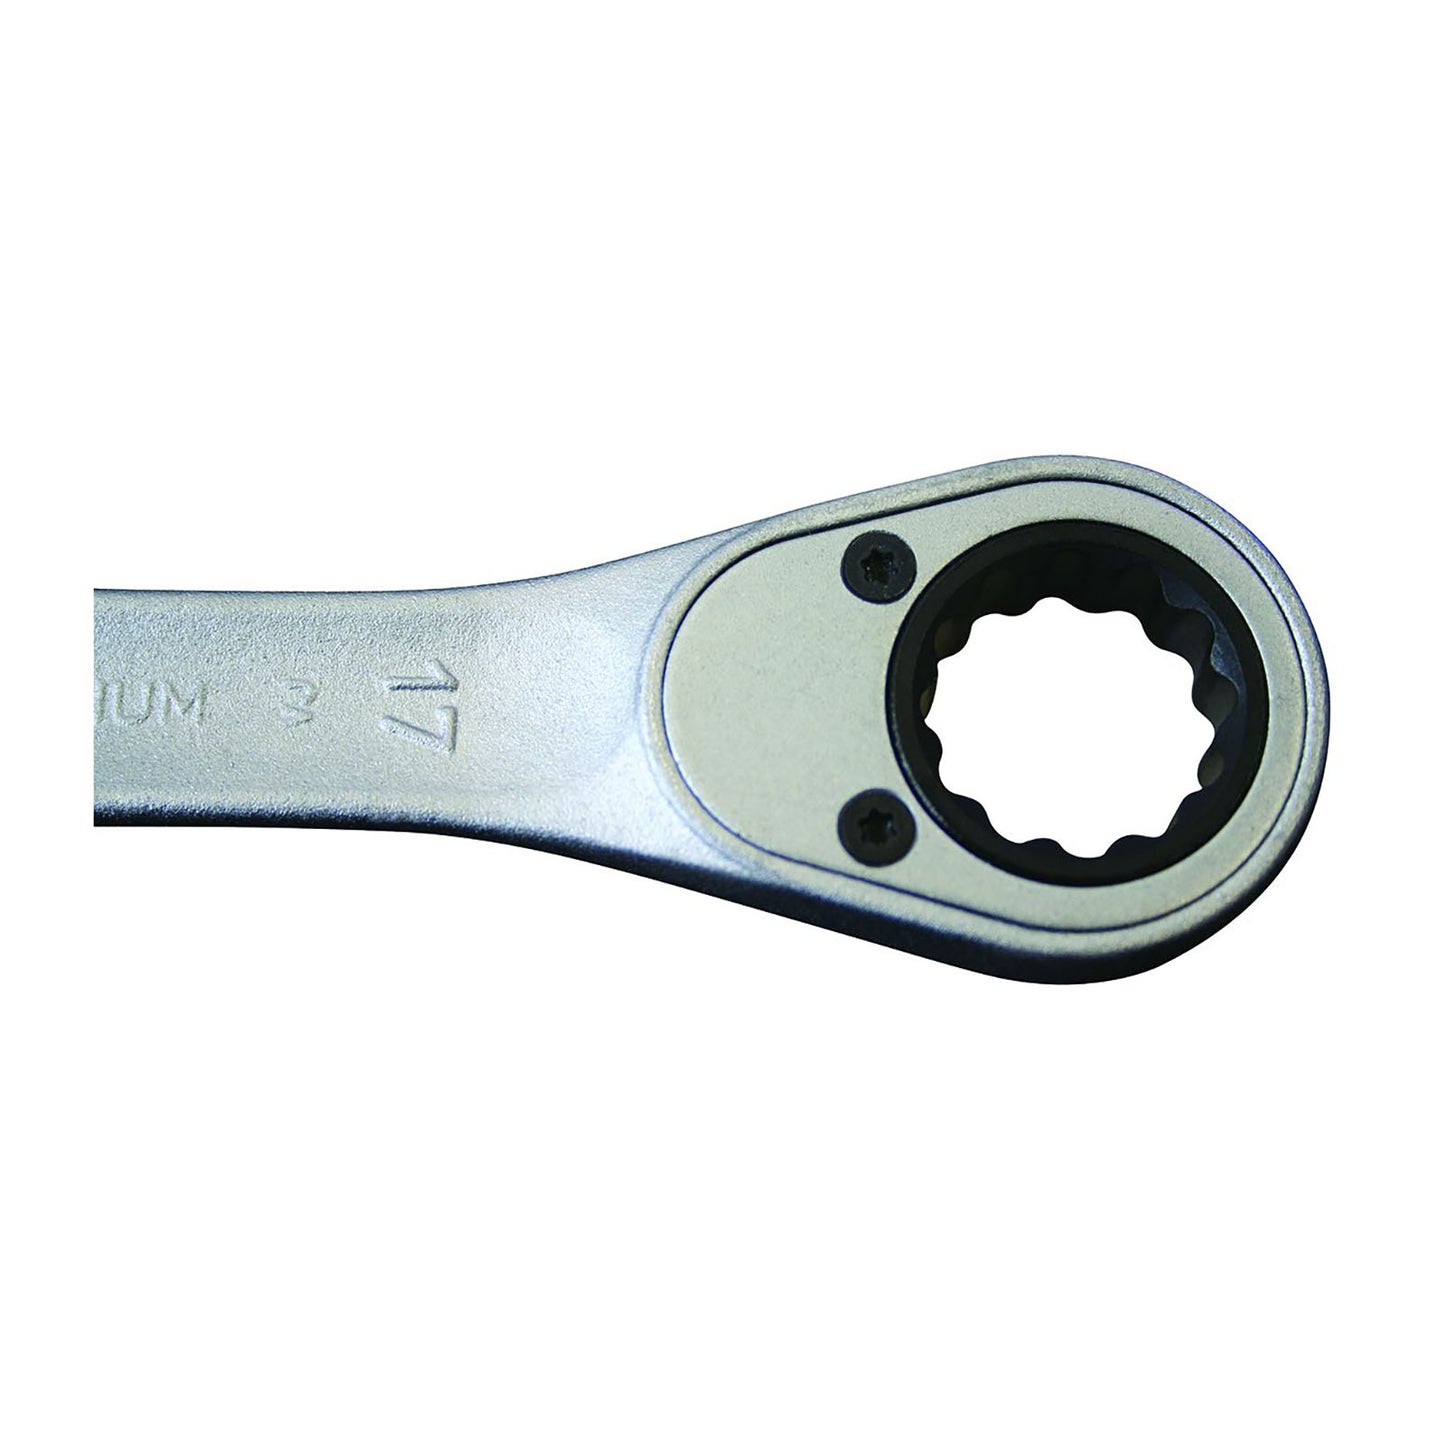 GEDORE 7 R 18 - Ratchet combination wrench, 18mm (2297167)